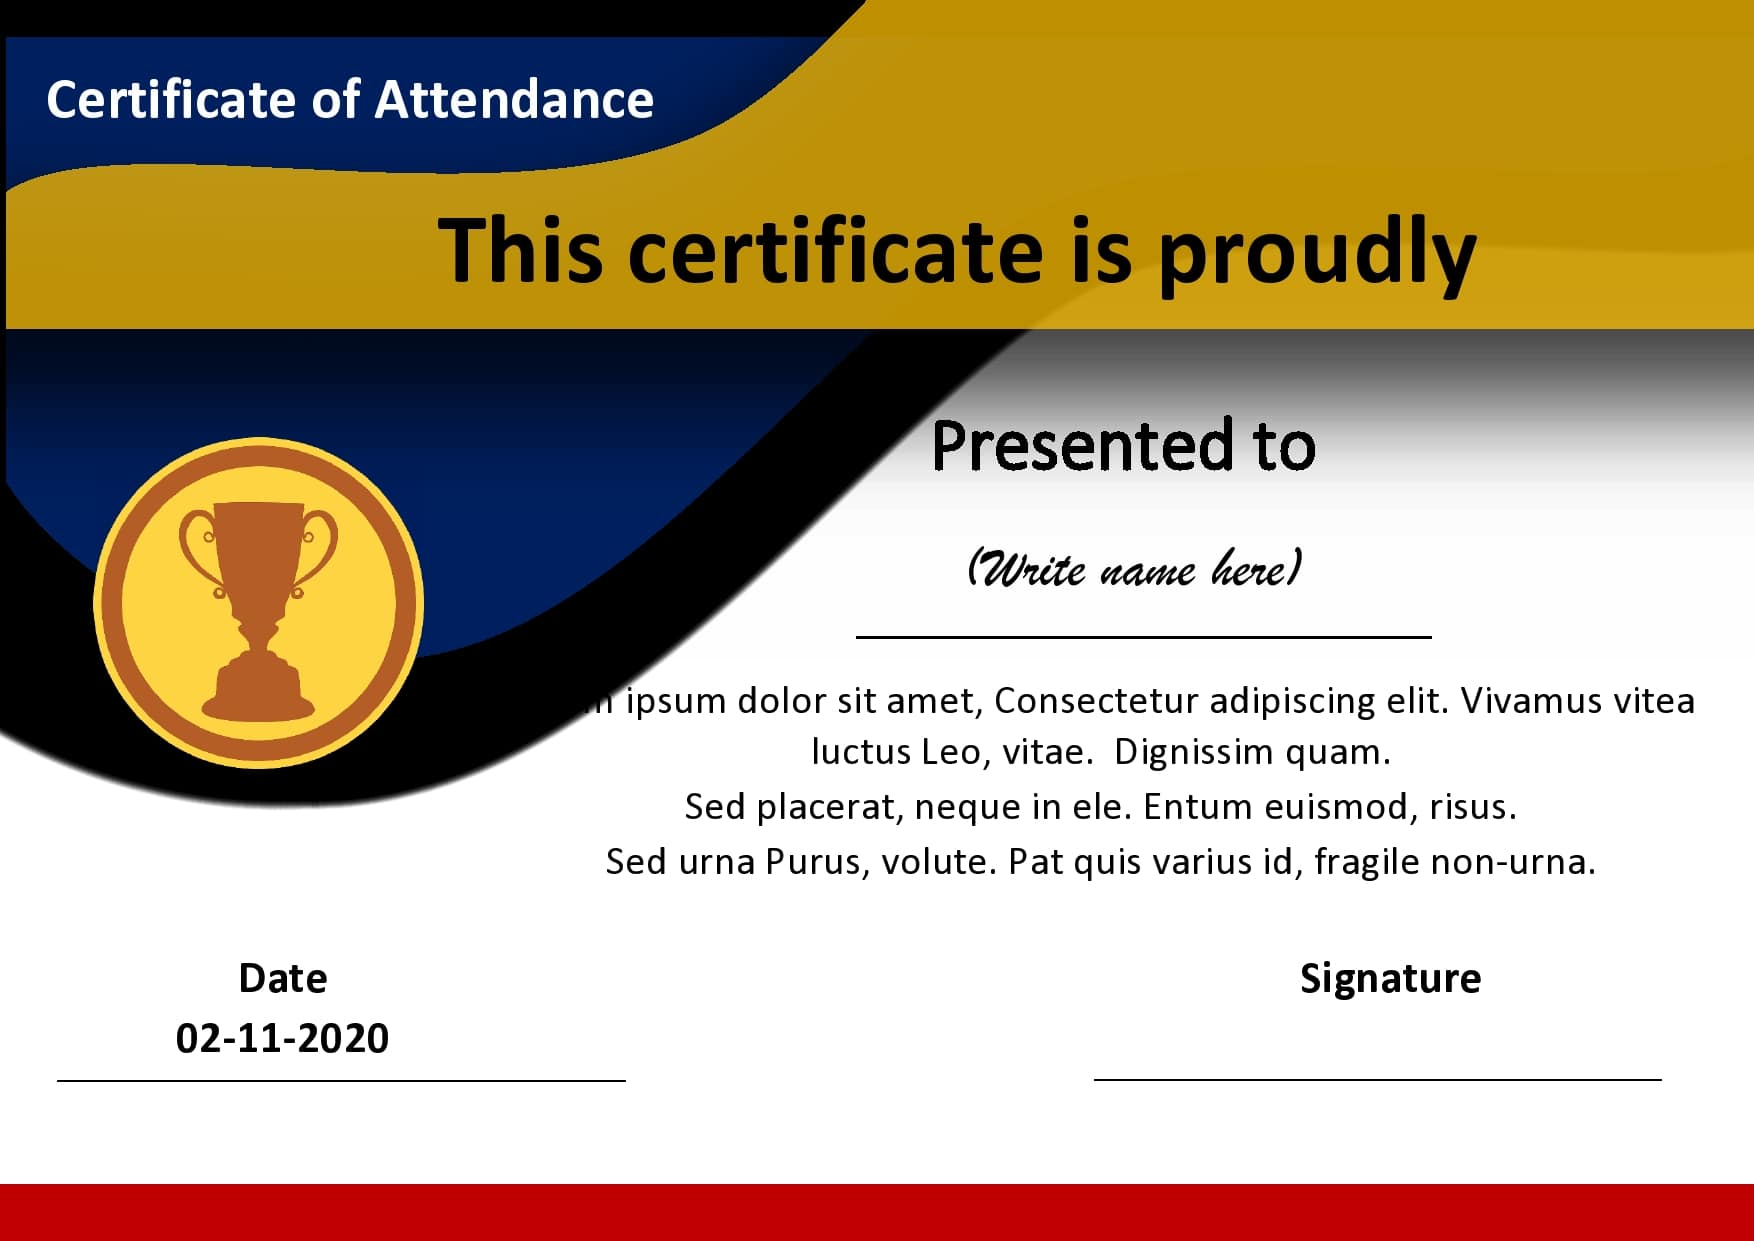 10 Free Certificates of Attendance Templates (Word) With Regard To Conference Certificate Of Attendance Template